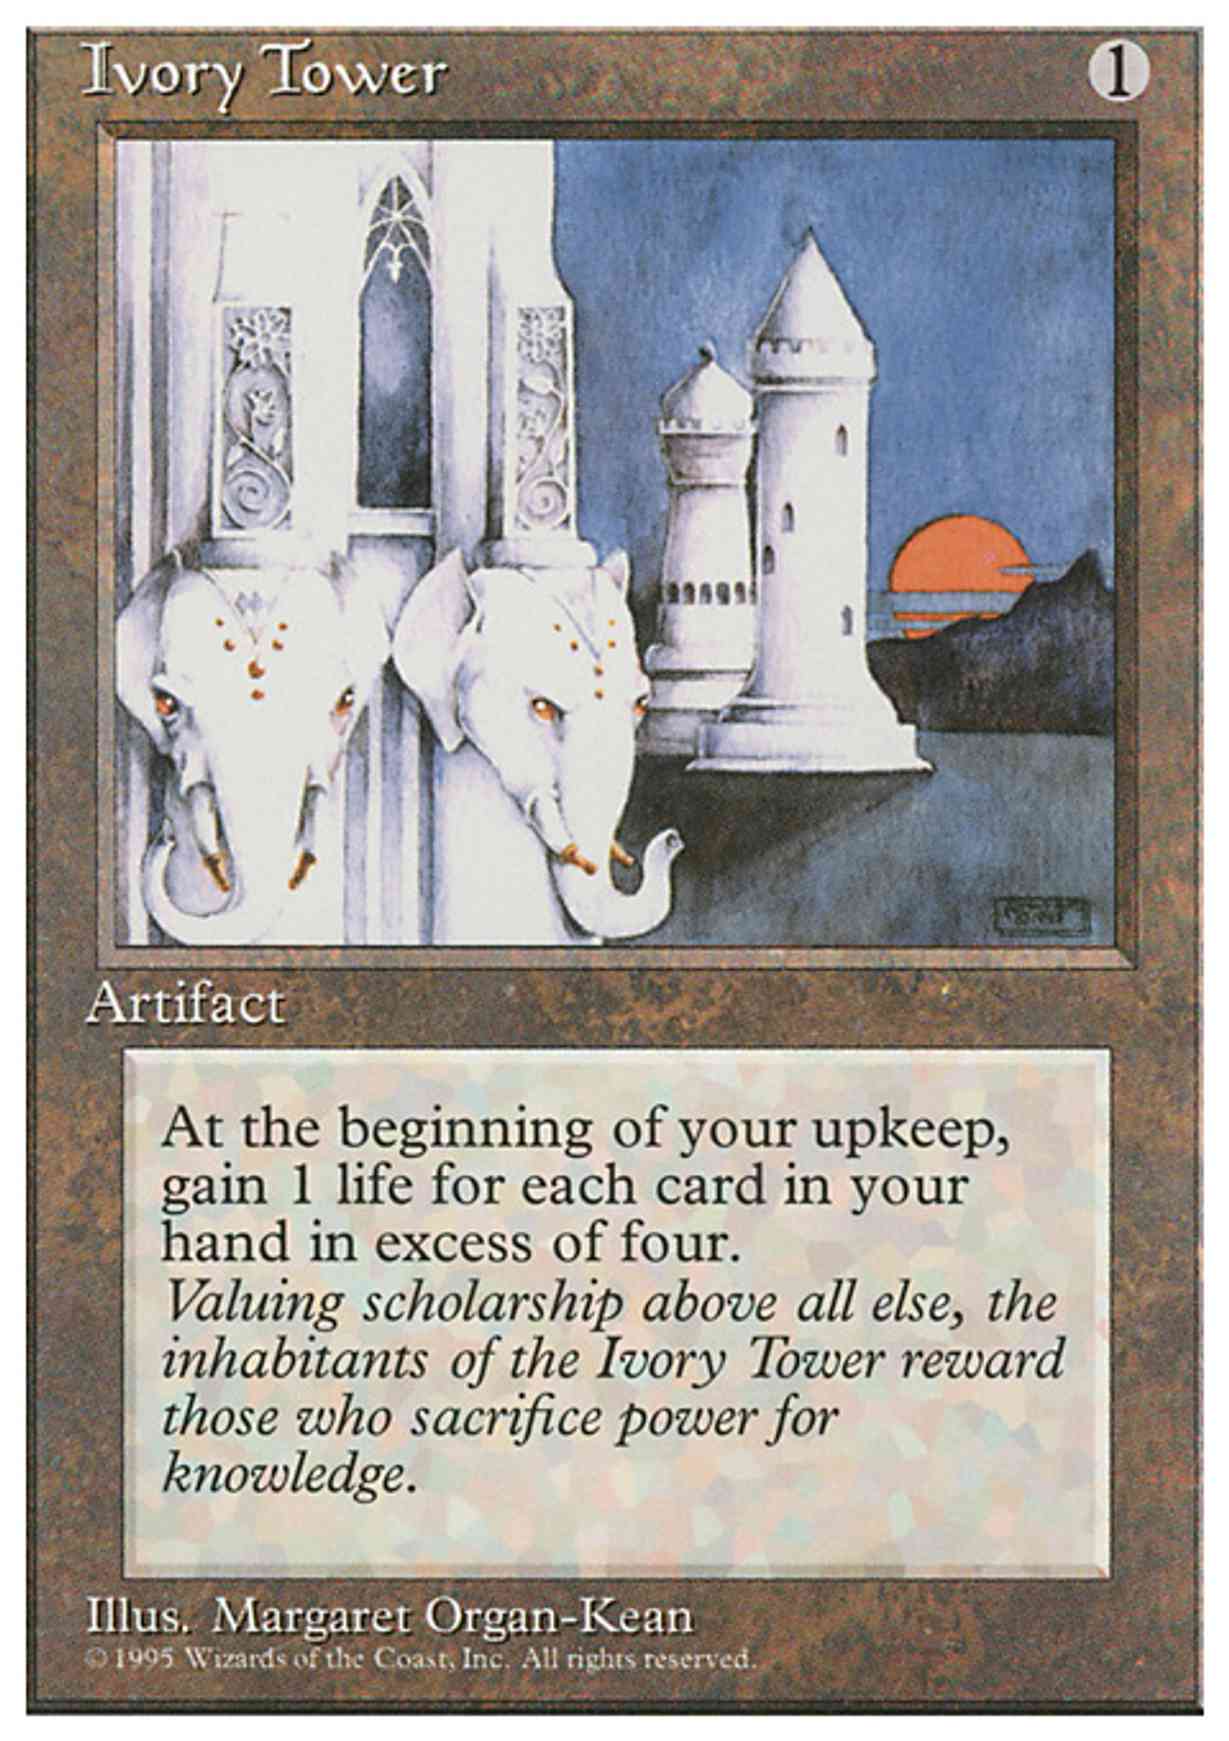 Ivory Tower magic card front